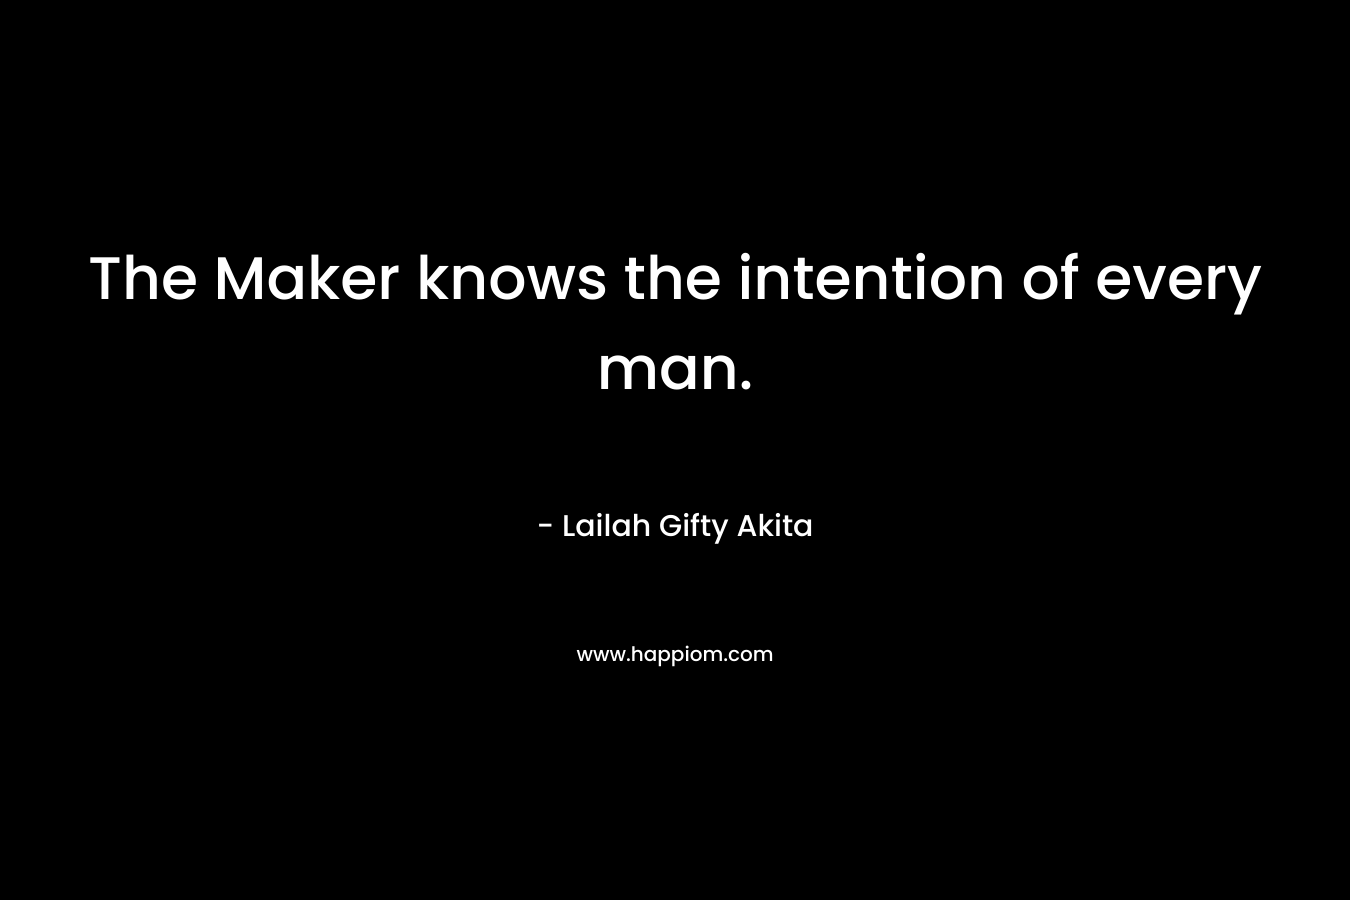 The Maker knows the intention of every man. – Lailah Gifty Akita